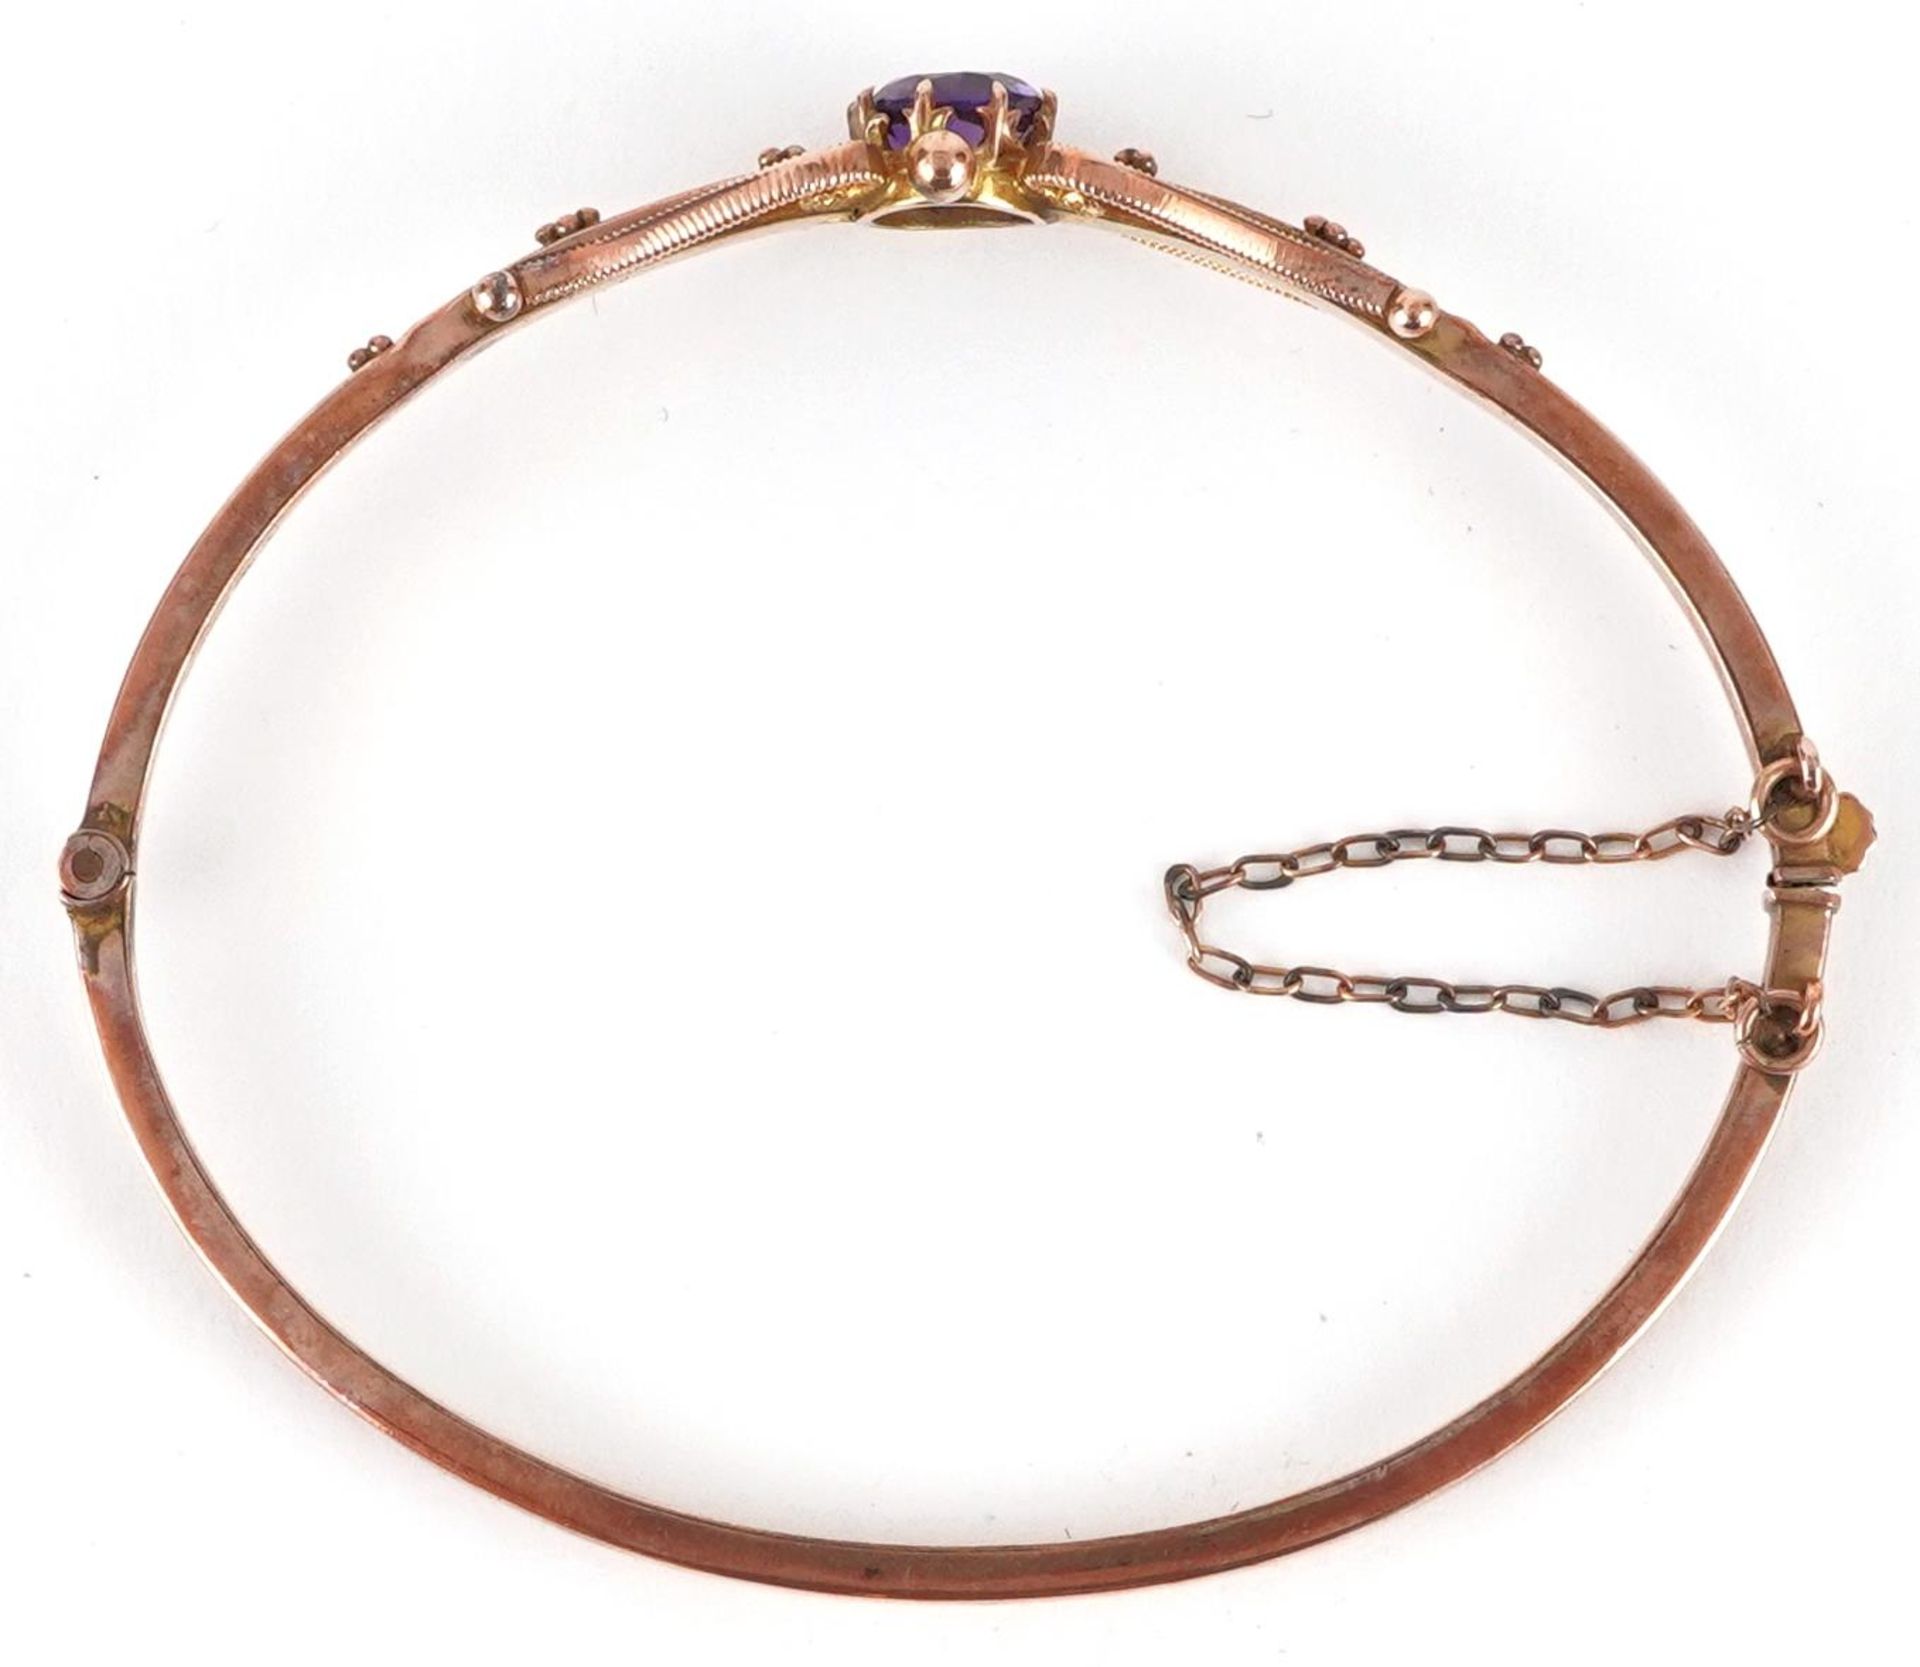 Edwardian 9ct rose gold amethyst bangle with scrolled decoration, the amethyst approximately 6.6mm - Image 3 of 4